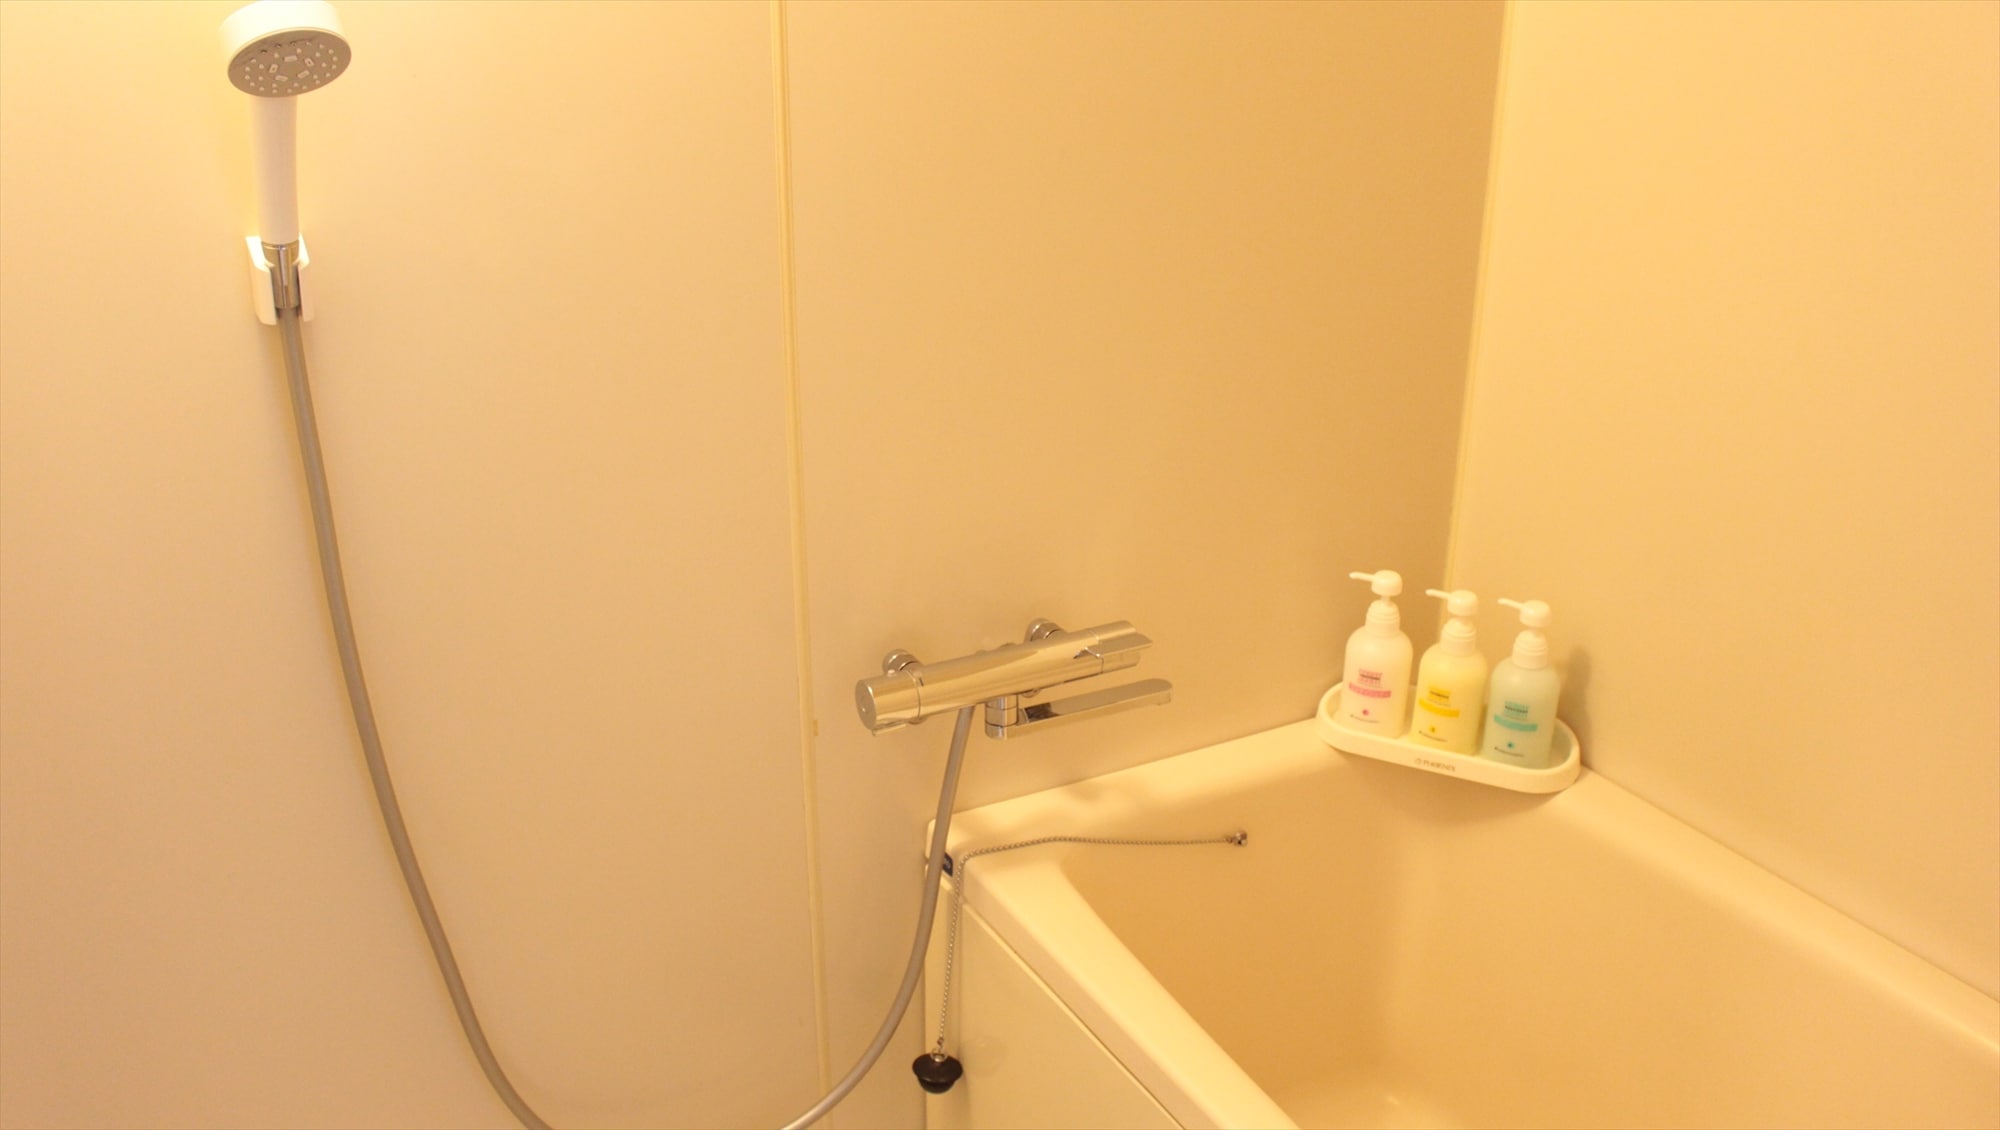 Room facilities "Bath" Shampoo, conditioner and body soap are available.